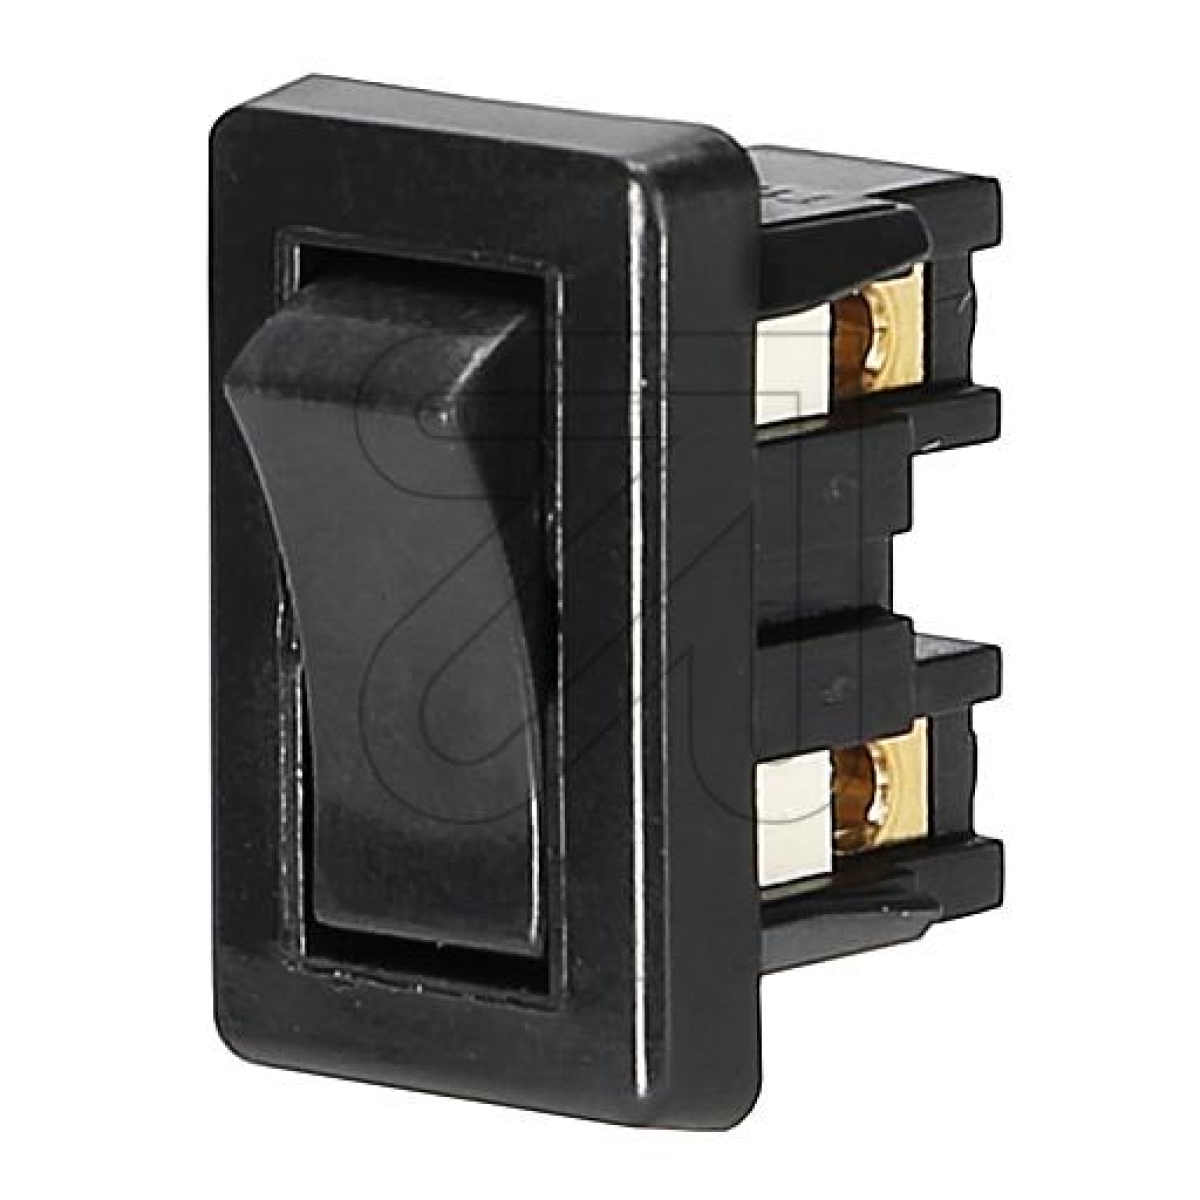 EGBRocker built-in switch 2A/029289 black-Price for 5 pcs.Article-No: 057395